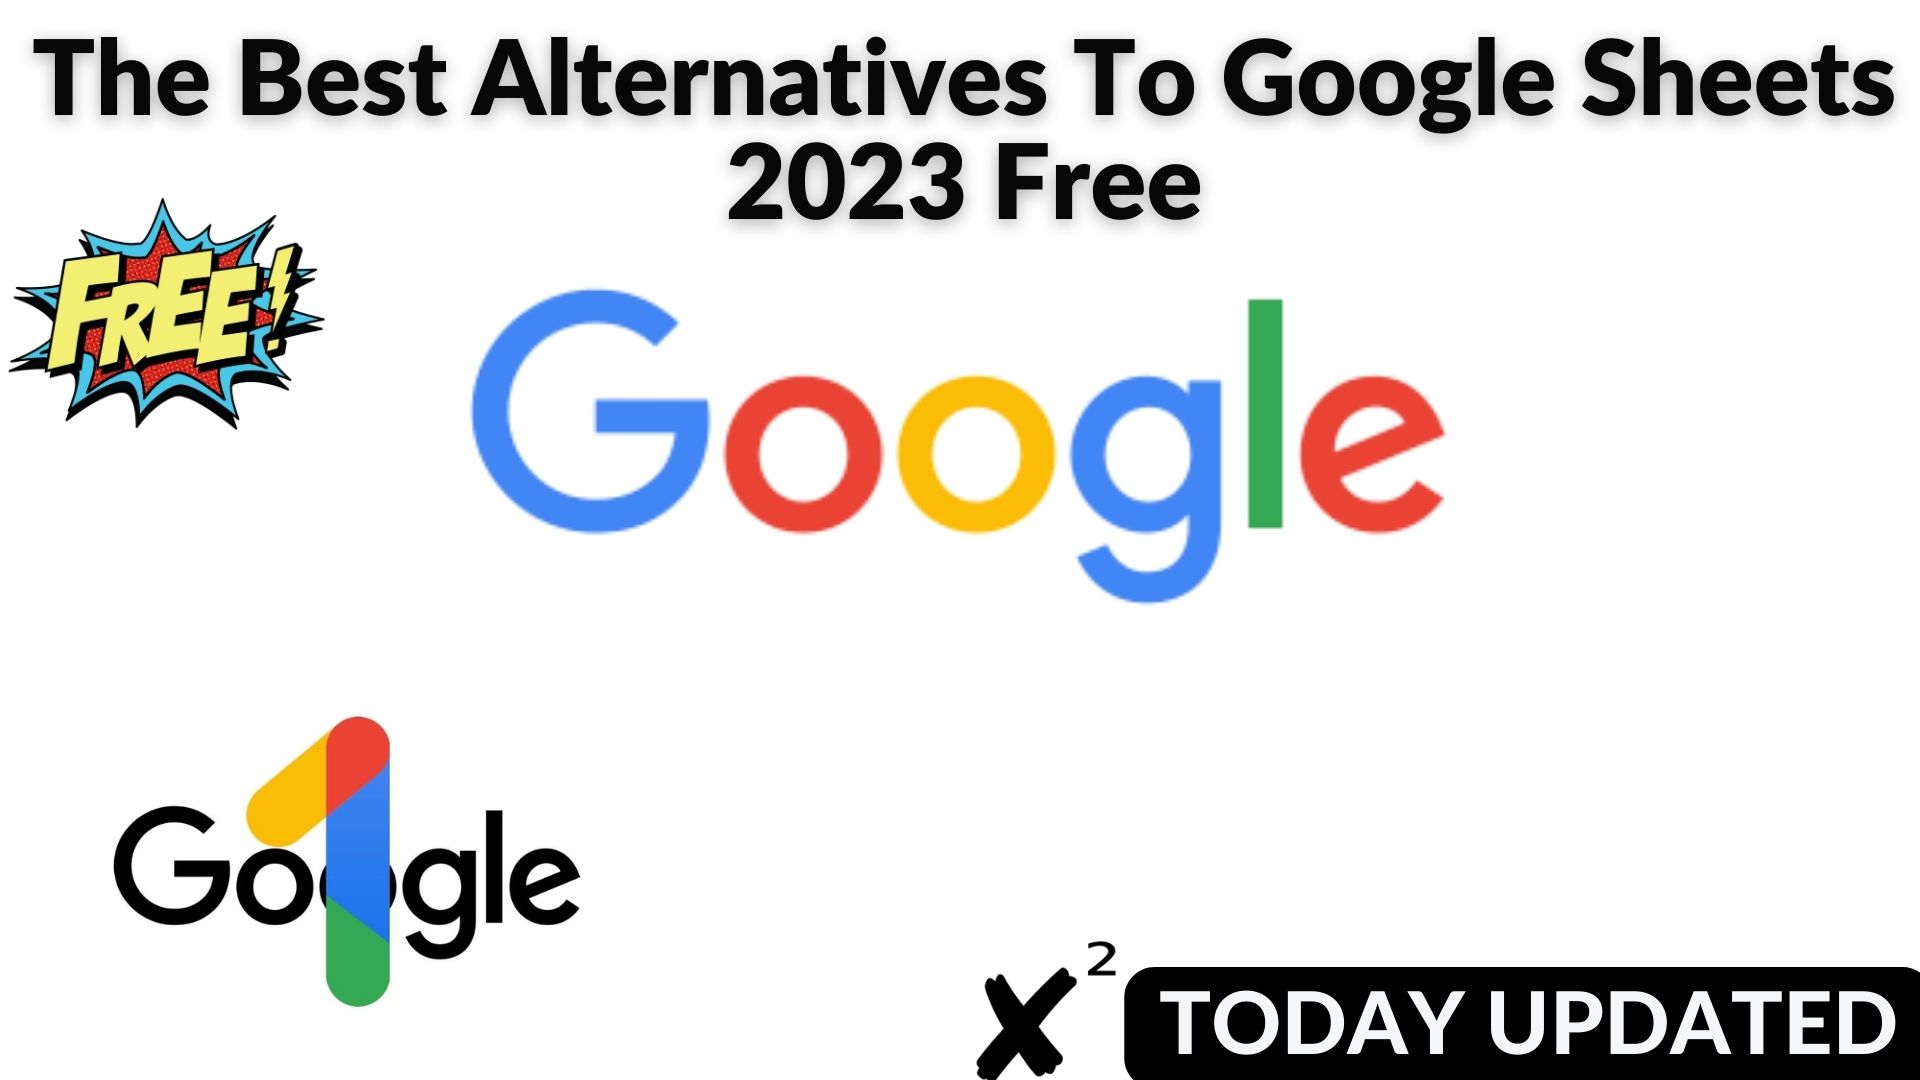 The best alternatives to google sheets 2023 free